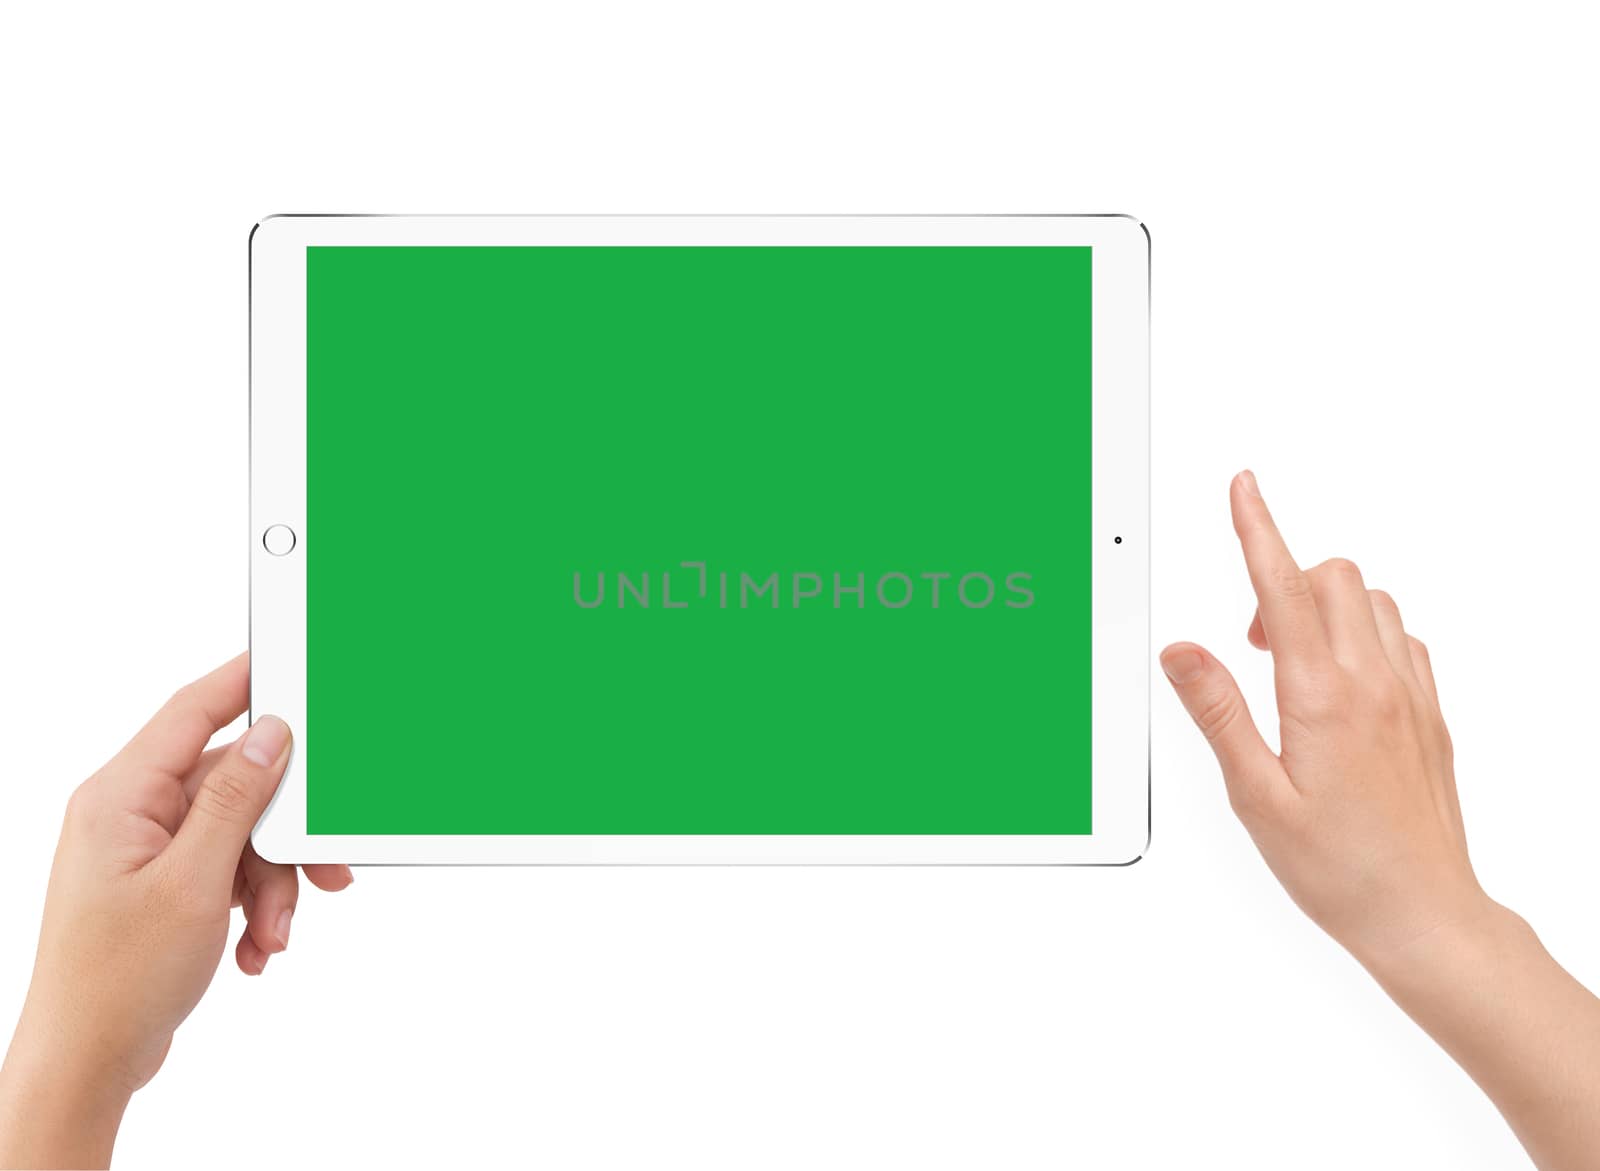 Isolated human left hand holding green screen white tablet compu by cougarsan